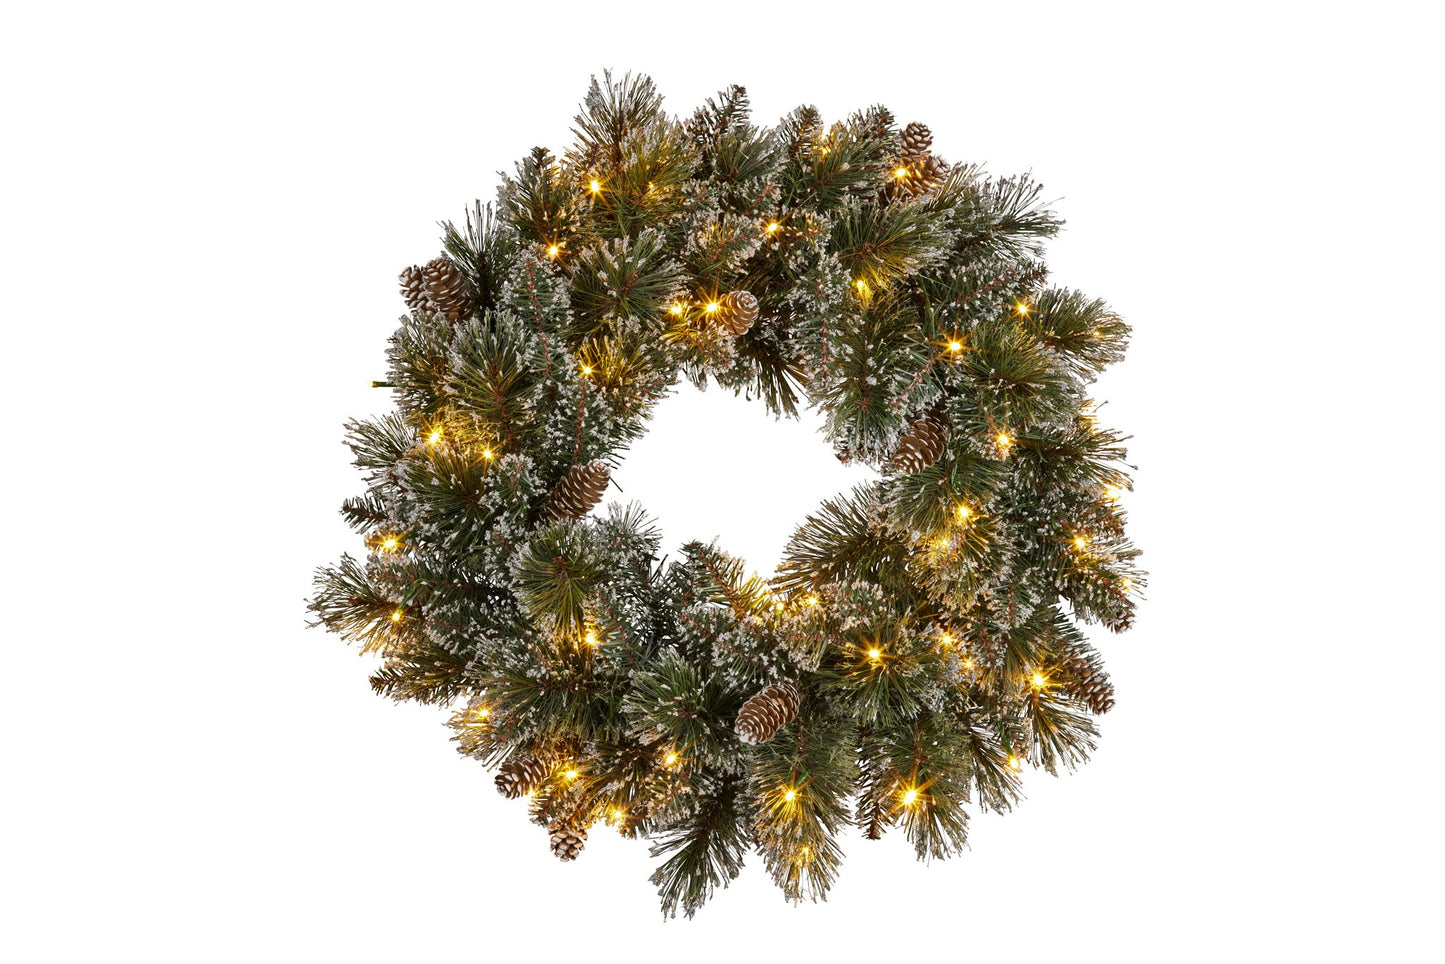 Christmas Wreath with Lights - 61cm Cashmere